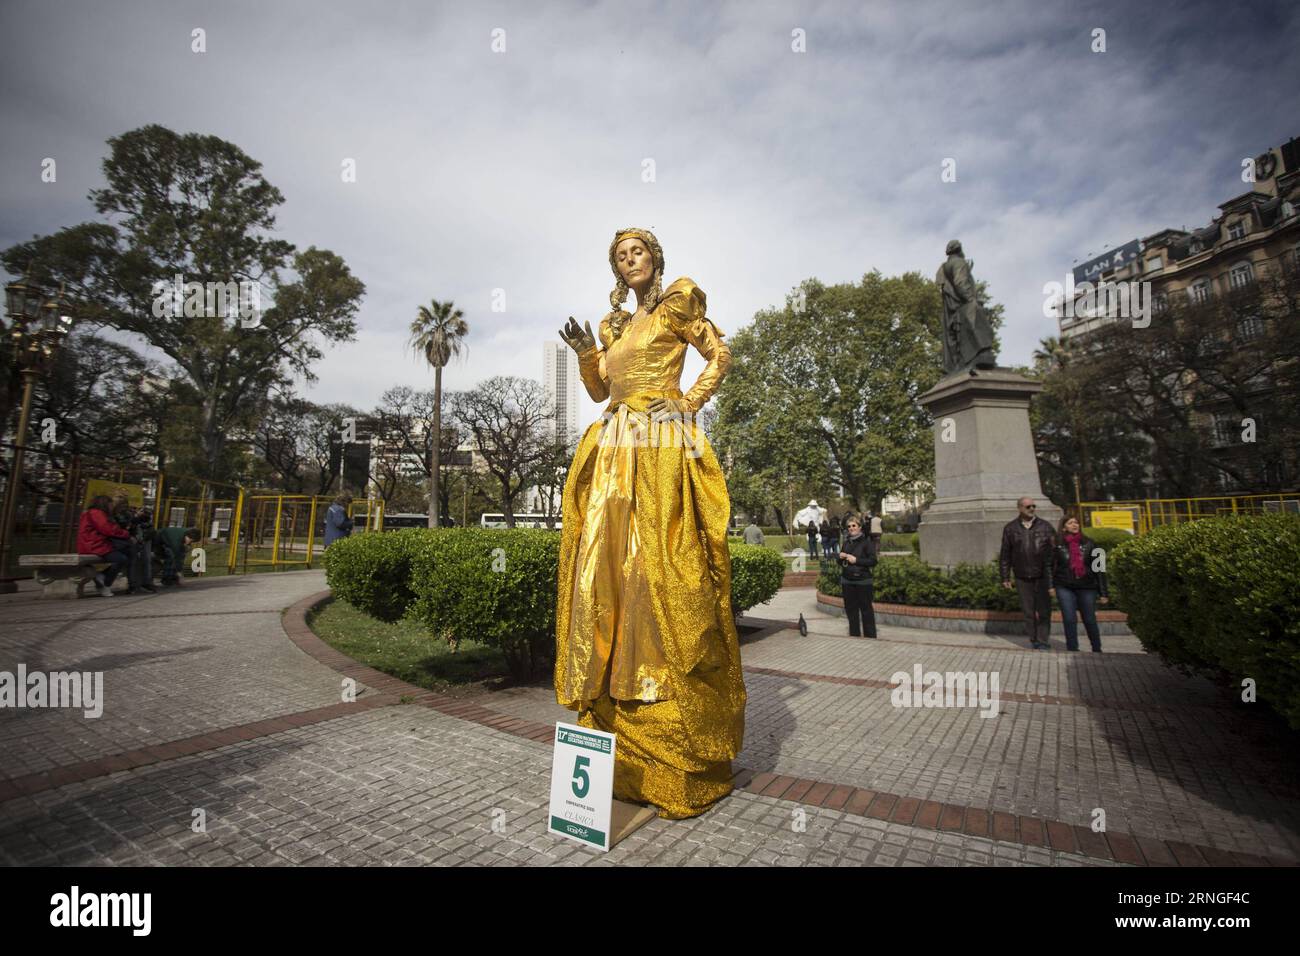 Lebende Statuen in Buenos Aires, Argentinien (160925) -- BUENOS AIRES, Sept. 25, 2016 -- An artist of human living statues takes part in the 17th National Contest of Living Statues in Buenos Aires, Argentina, on Sept. 24, 2016. )(zf) ARGENTINA-BUENOS AIRES-SOCIETY-EVENT MARTINxZABALA PUBLICATIONxNOTxINxCHN   live Statues in Buenos Aires Argentina  Buenos Aires Sept 25 2016 to Artist of Human Living statues Takes Part in The 17th National Contest of Living statues in Buenos Aires Argentina ON Sept 24 2016 ZF Argentina Buenos Aires Society Event MartinXZabala PUBLICATIONxNOTxINxCHN Stock Photo